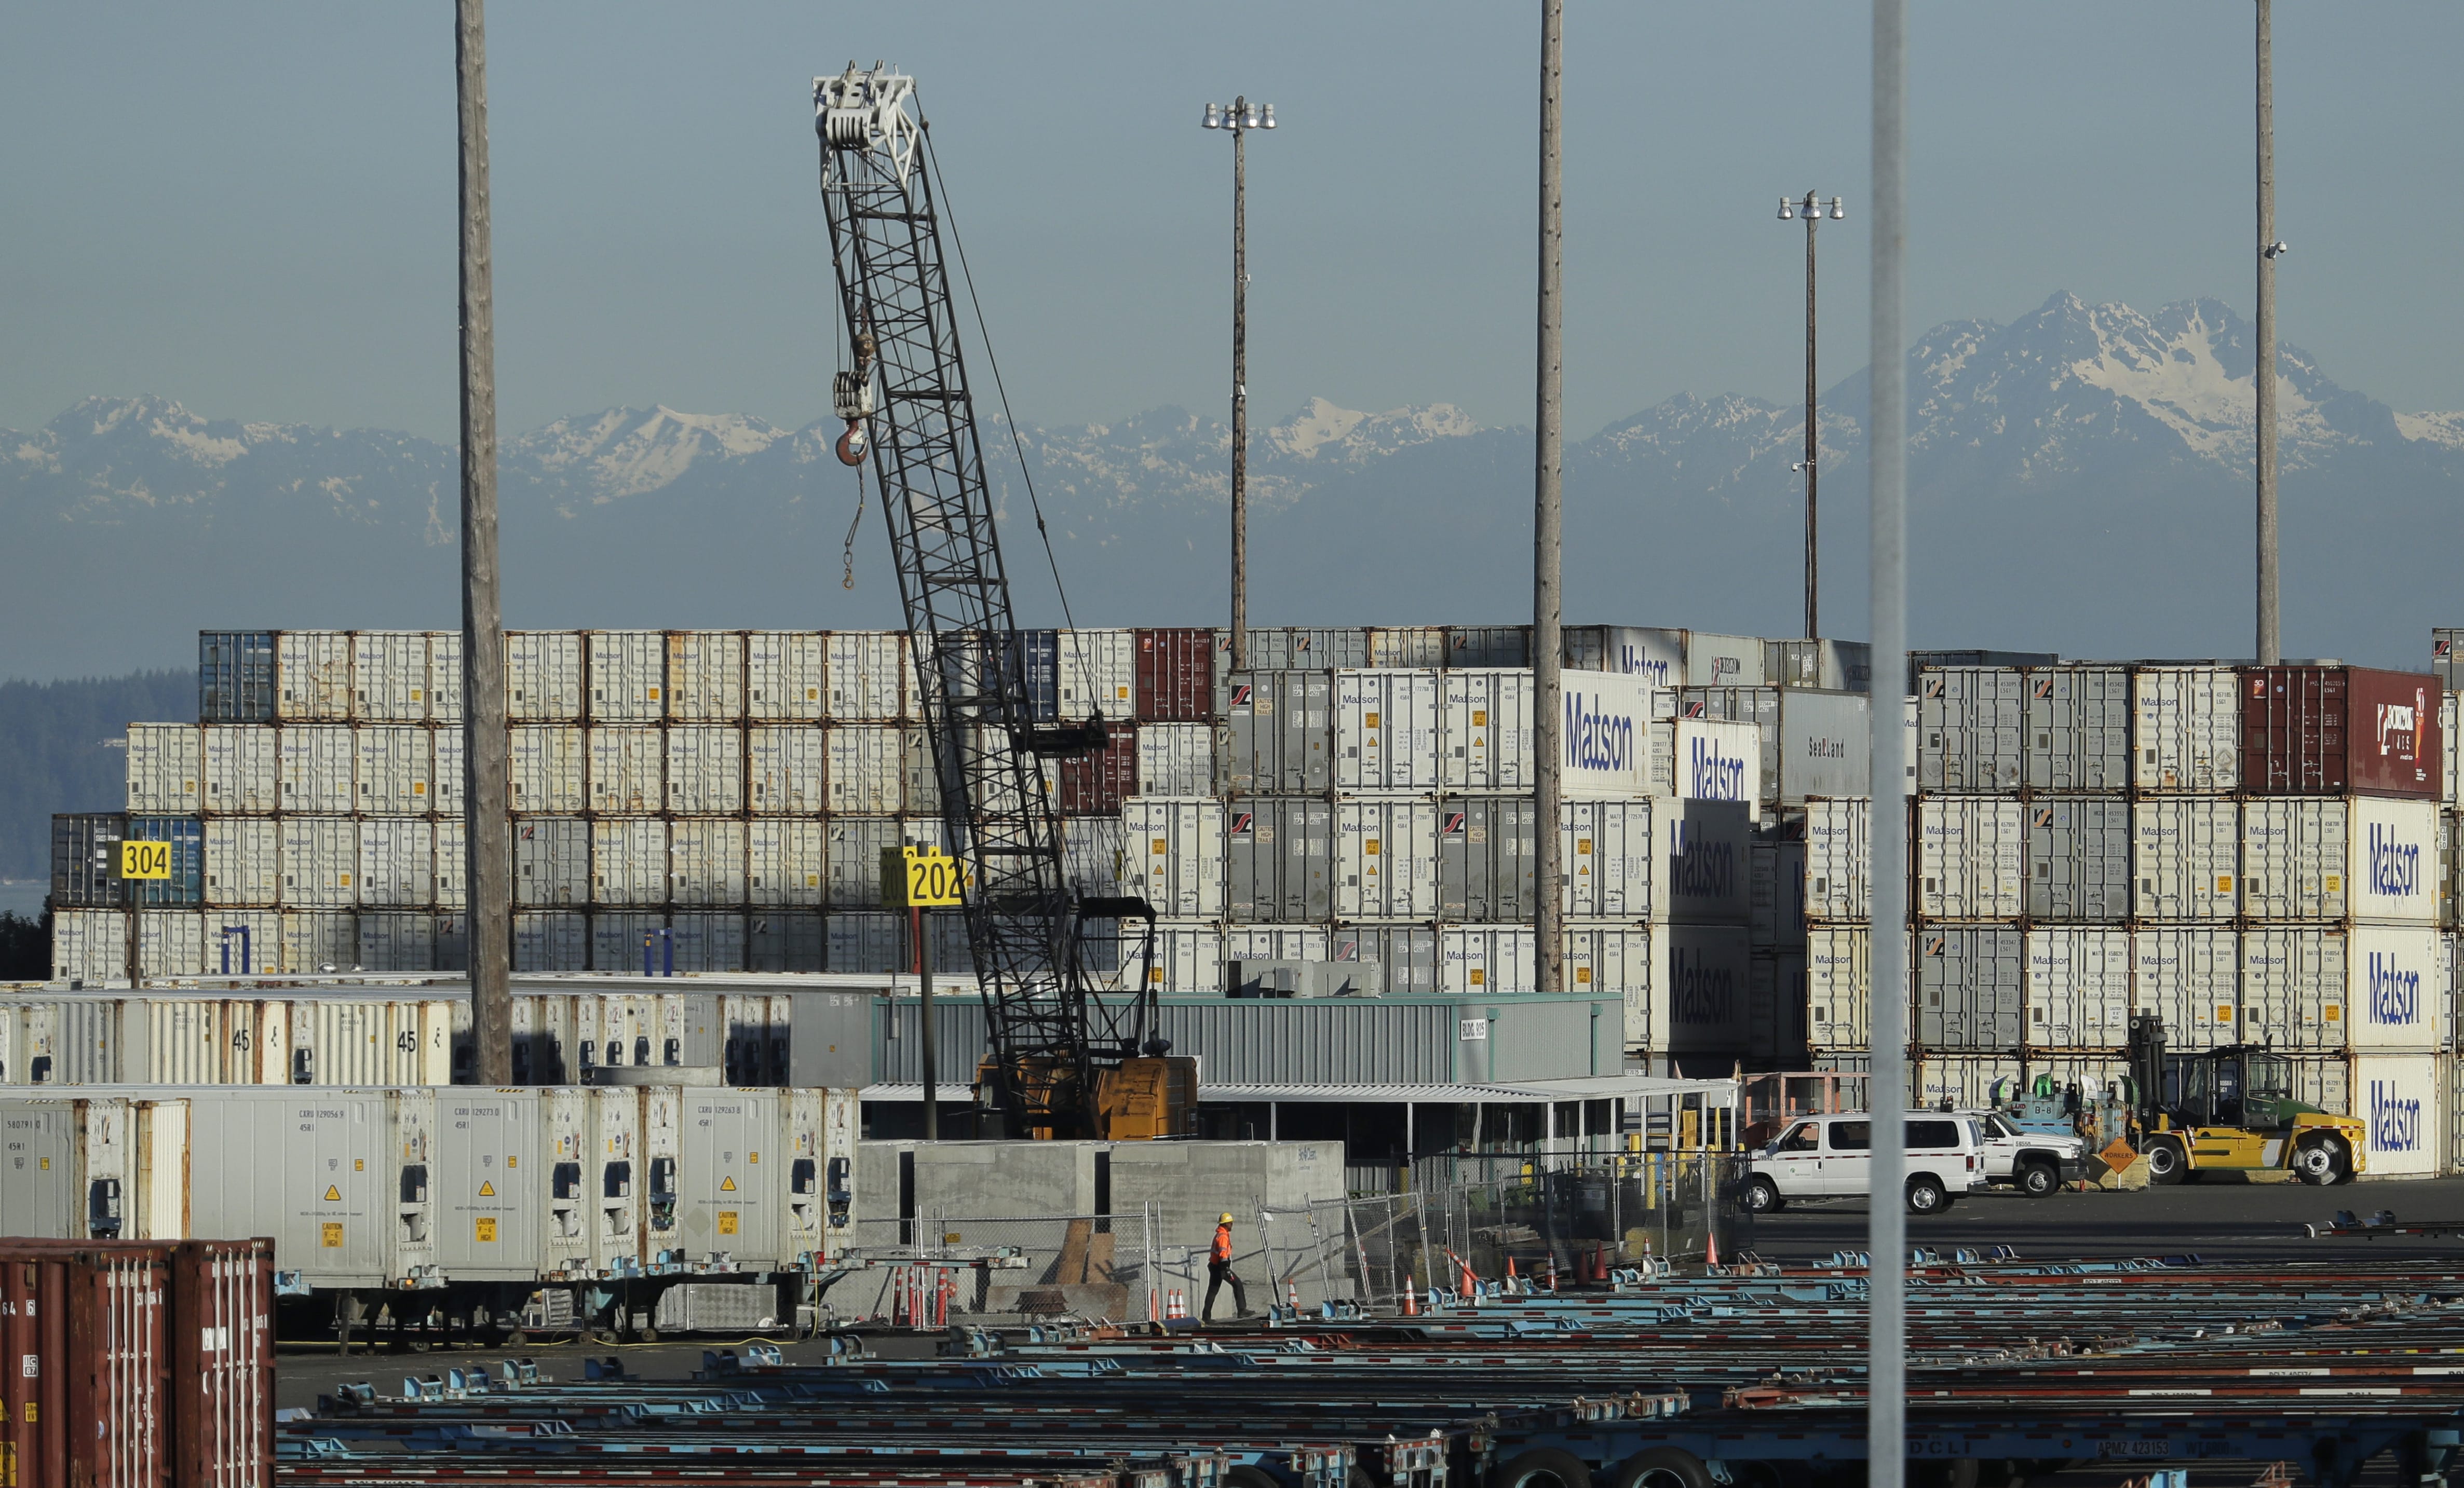 A worker walks near truck trailers and cargo containers at the Port of Tacoma in Tacoma. Hundreds of businesses, trade groups and individuals have written to complain about President Donald Trump's threat to impose tariffs on the remaining $300 billion in Chinese goods that he hasn't already hit with 25% import taxes, saying the additional import taxes would drive up prices for consumers, squeeze profits and leave U.S. companies at a competitive disadvantage to foreign rivals that aren't subject to higher taxes on the vital components they buy from China.  (AP Photo/Ted S.